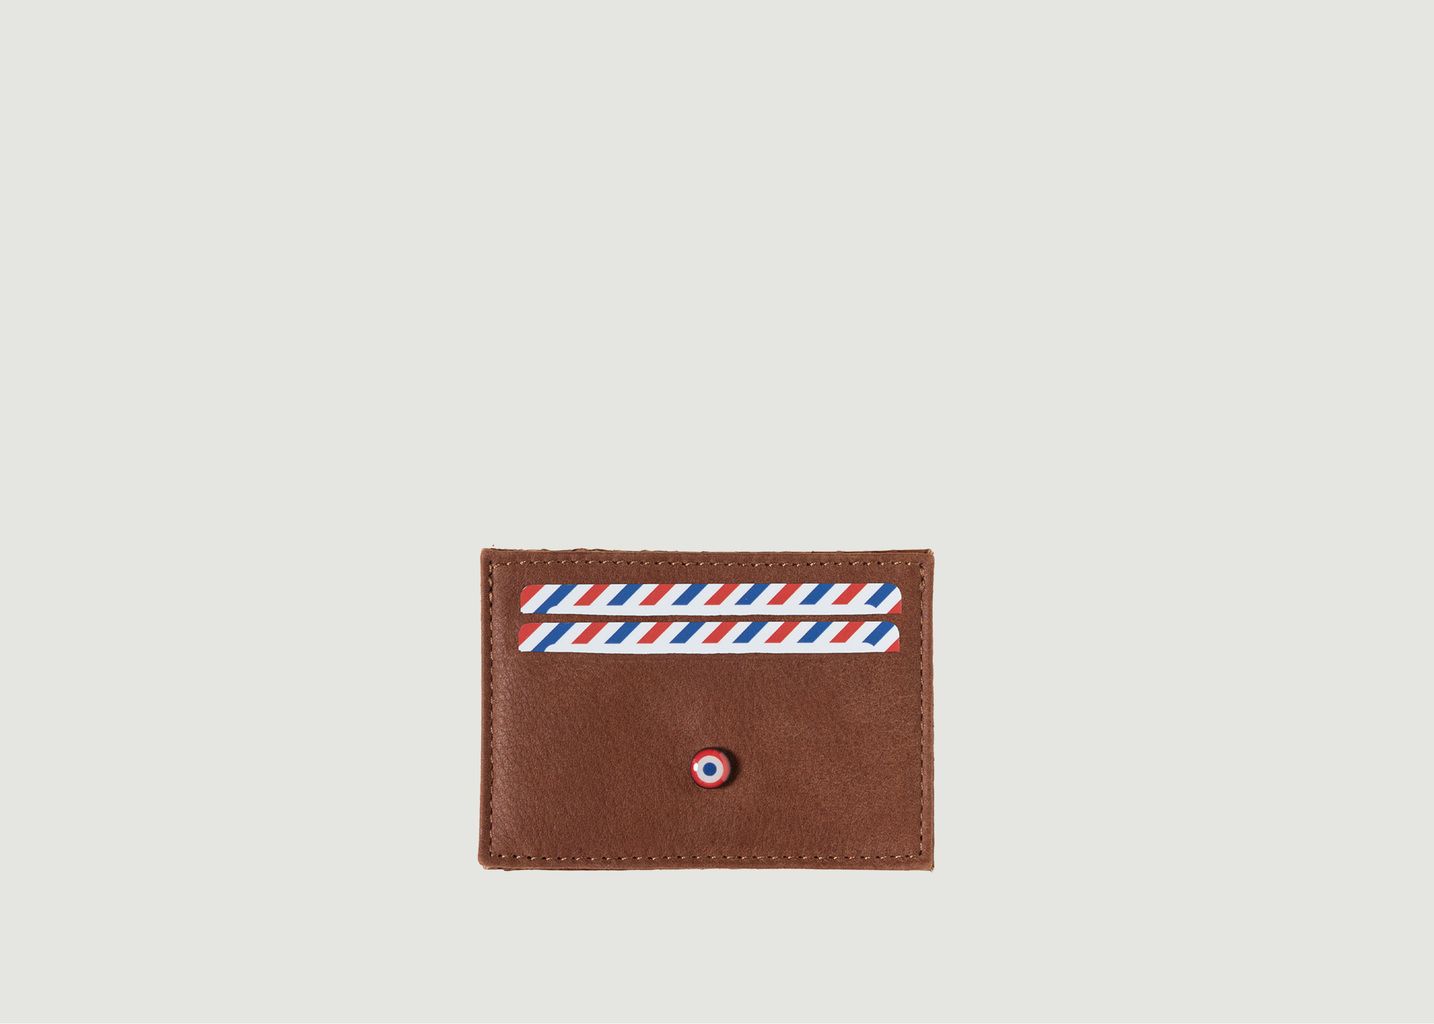 Georges fish leather and nubuck cardholder  - Larmorie